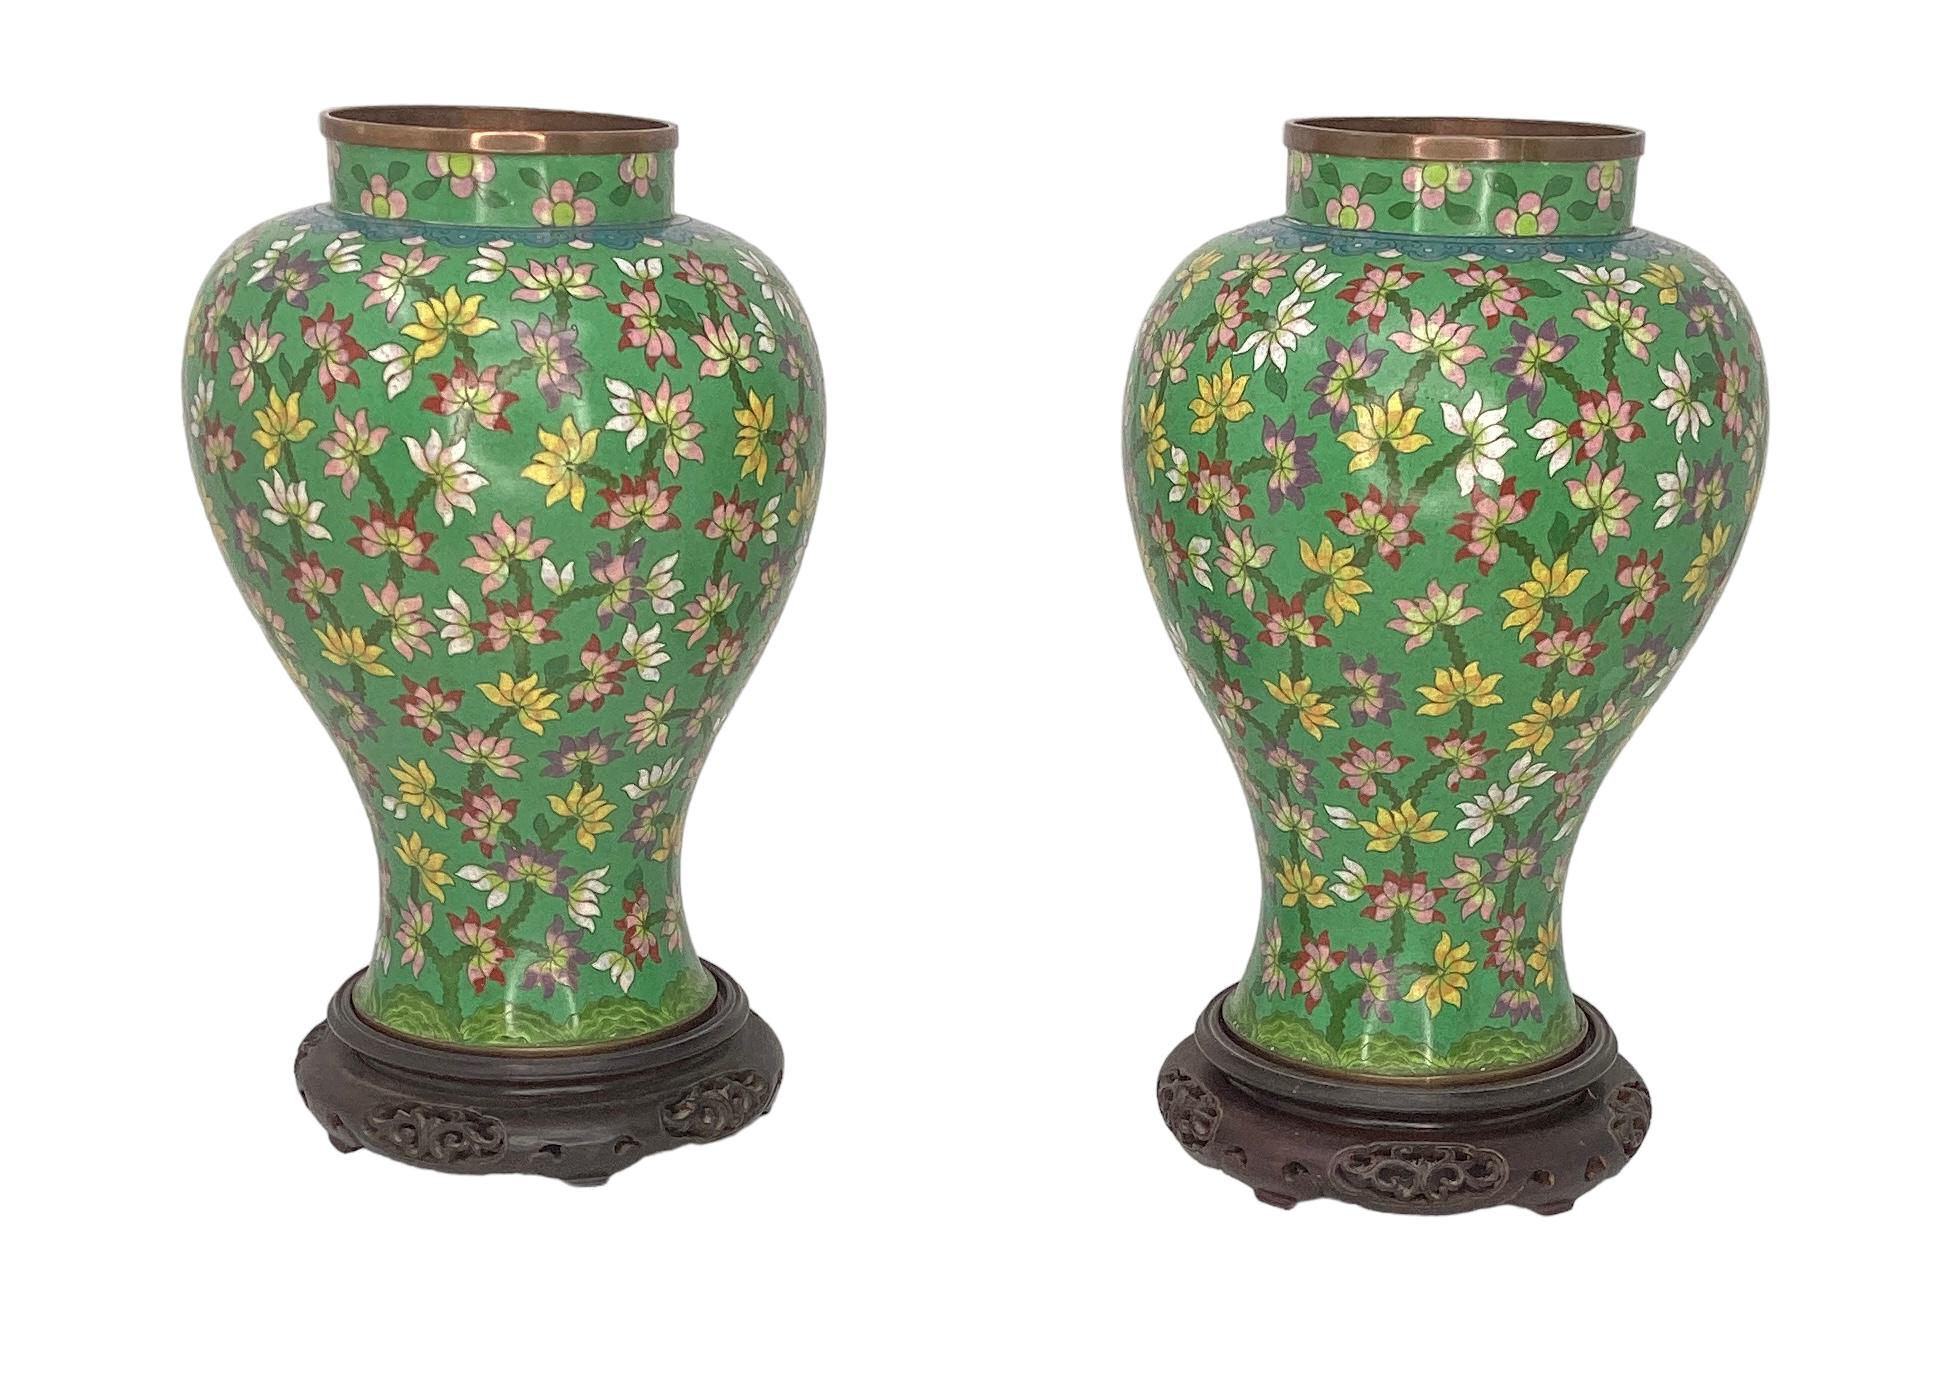 Metal Pair of Antique Chinese Cloisonné Covered Ginger Jar Vases